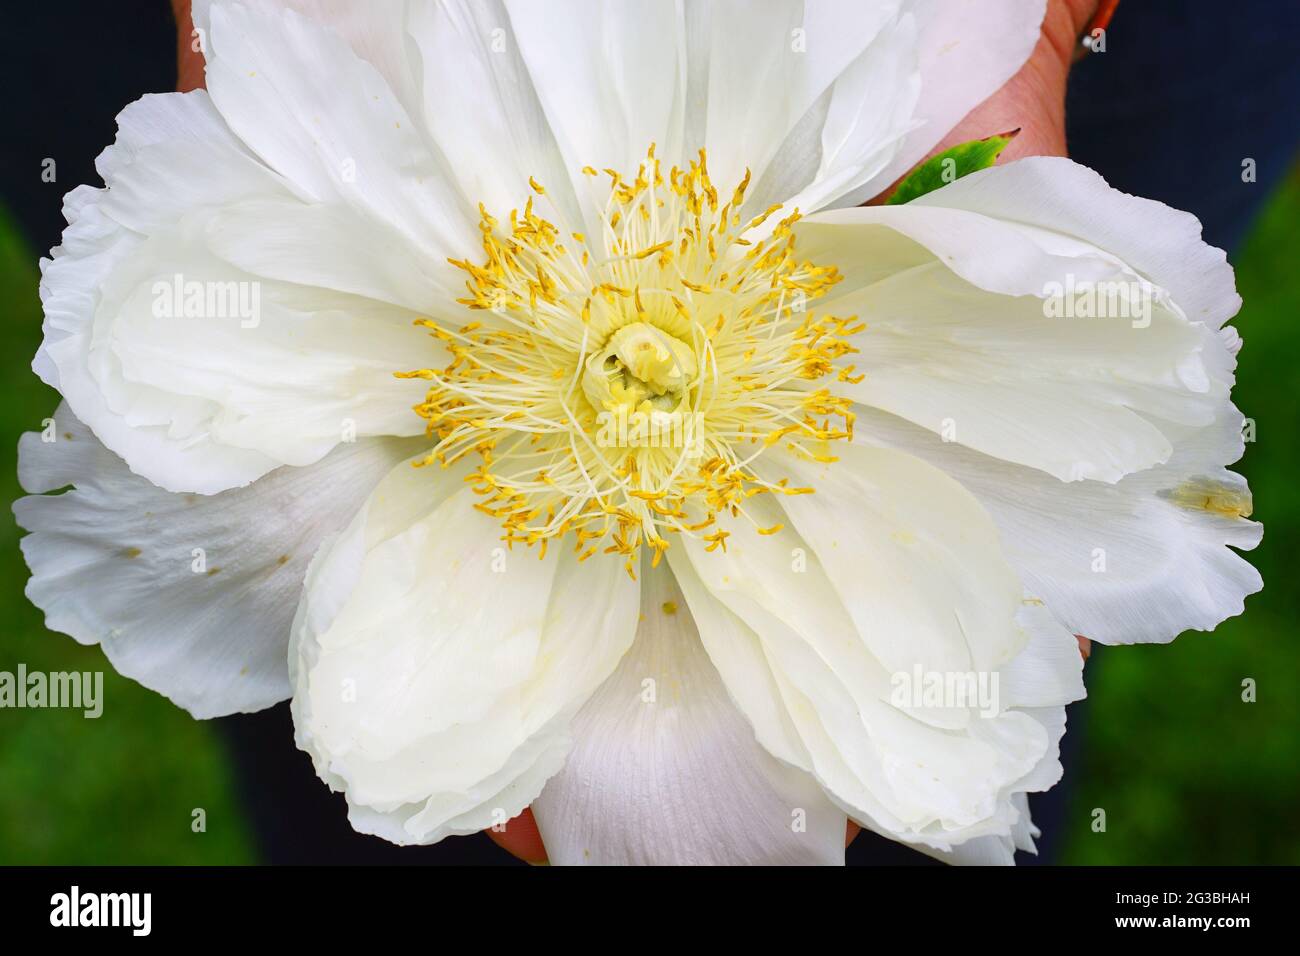 A woman holding a giant white and yellow tree peony flower in her hands Stock Photo